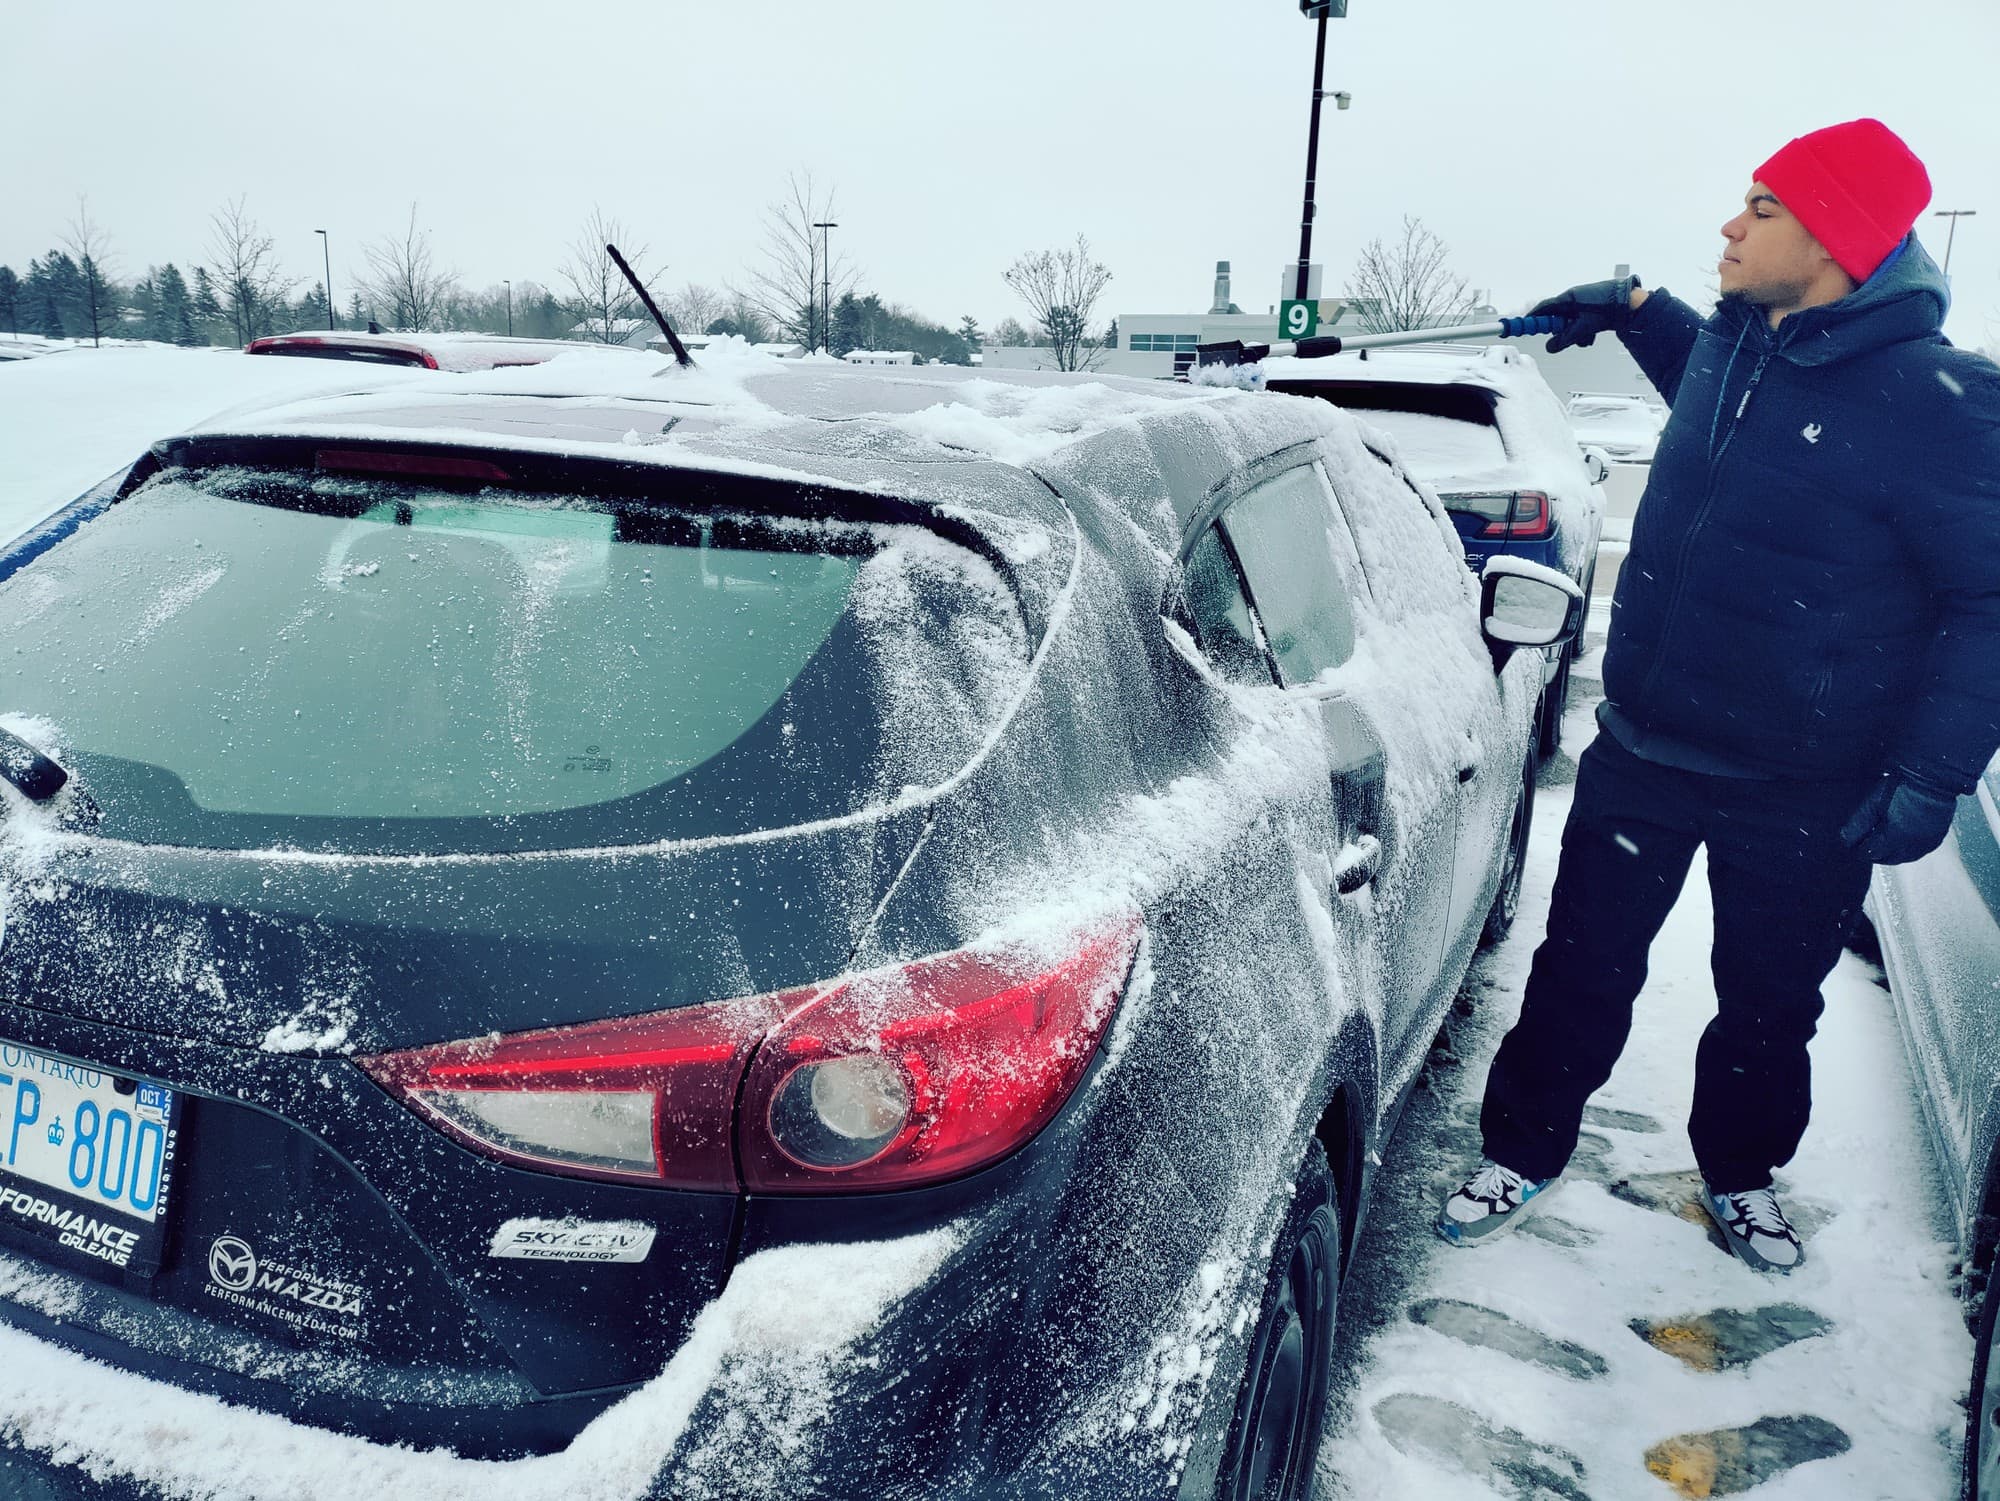 Nathan Monpremier, a supply chain undergrad, said on Jan. 12 that he was clearing his car to get home before the snowfall.